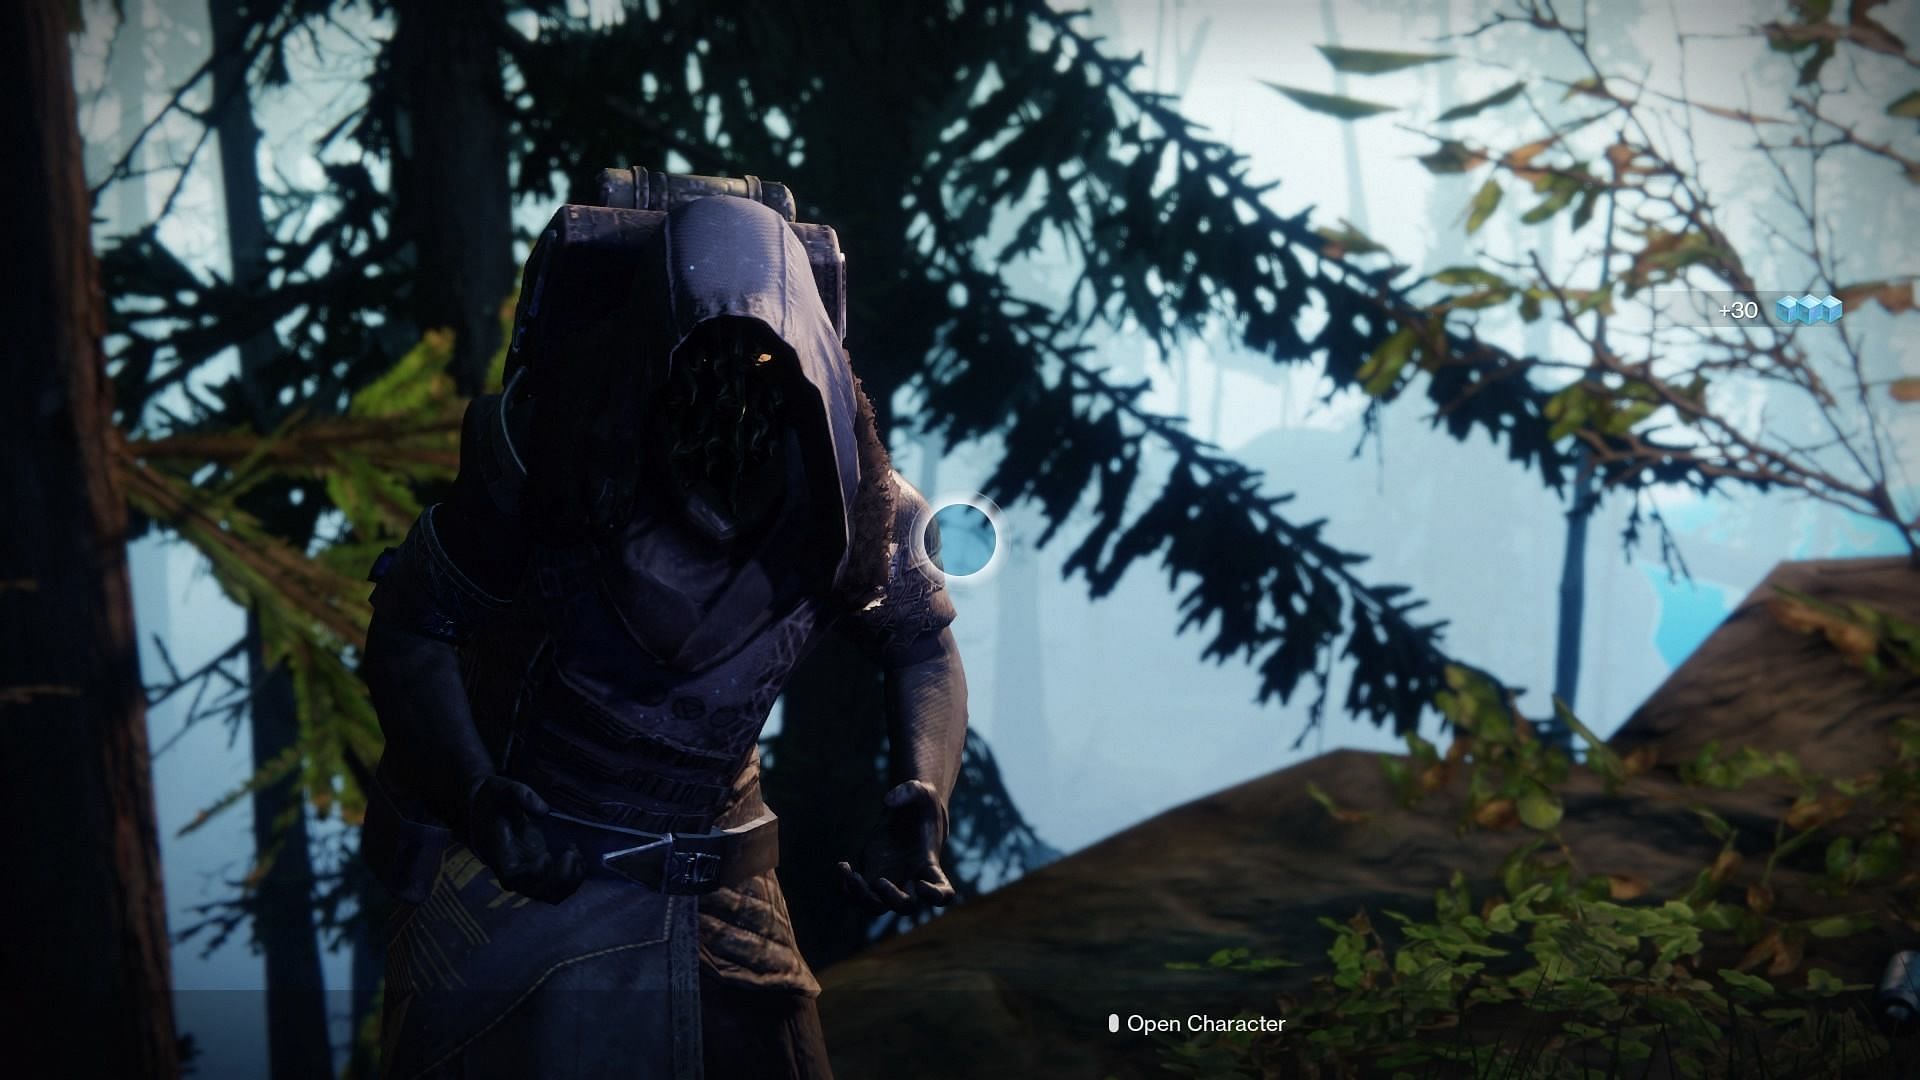 Xur, located in EDZ this week in Destiny 2, has some exciting gear for sale (Image via Bungie)